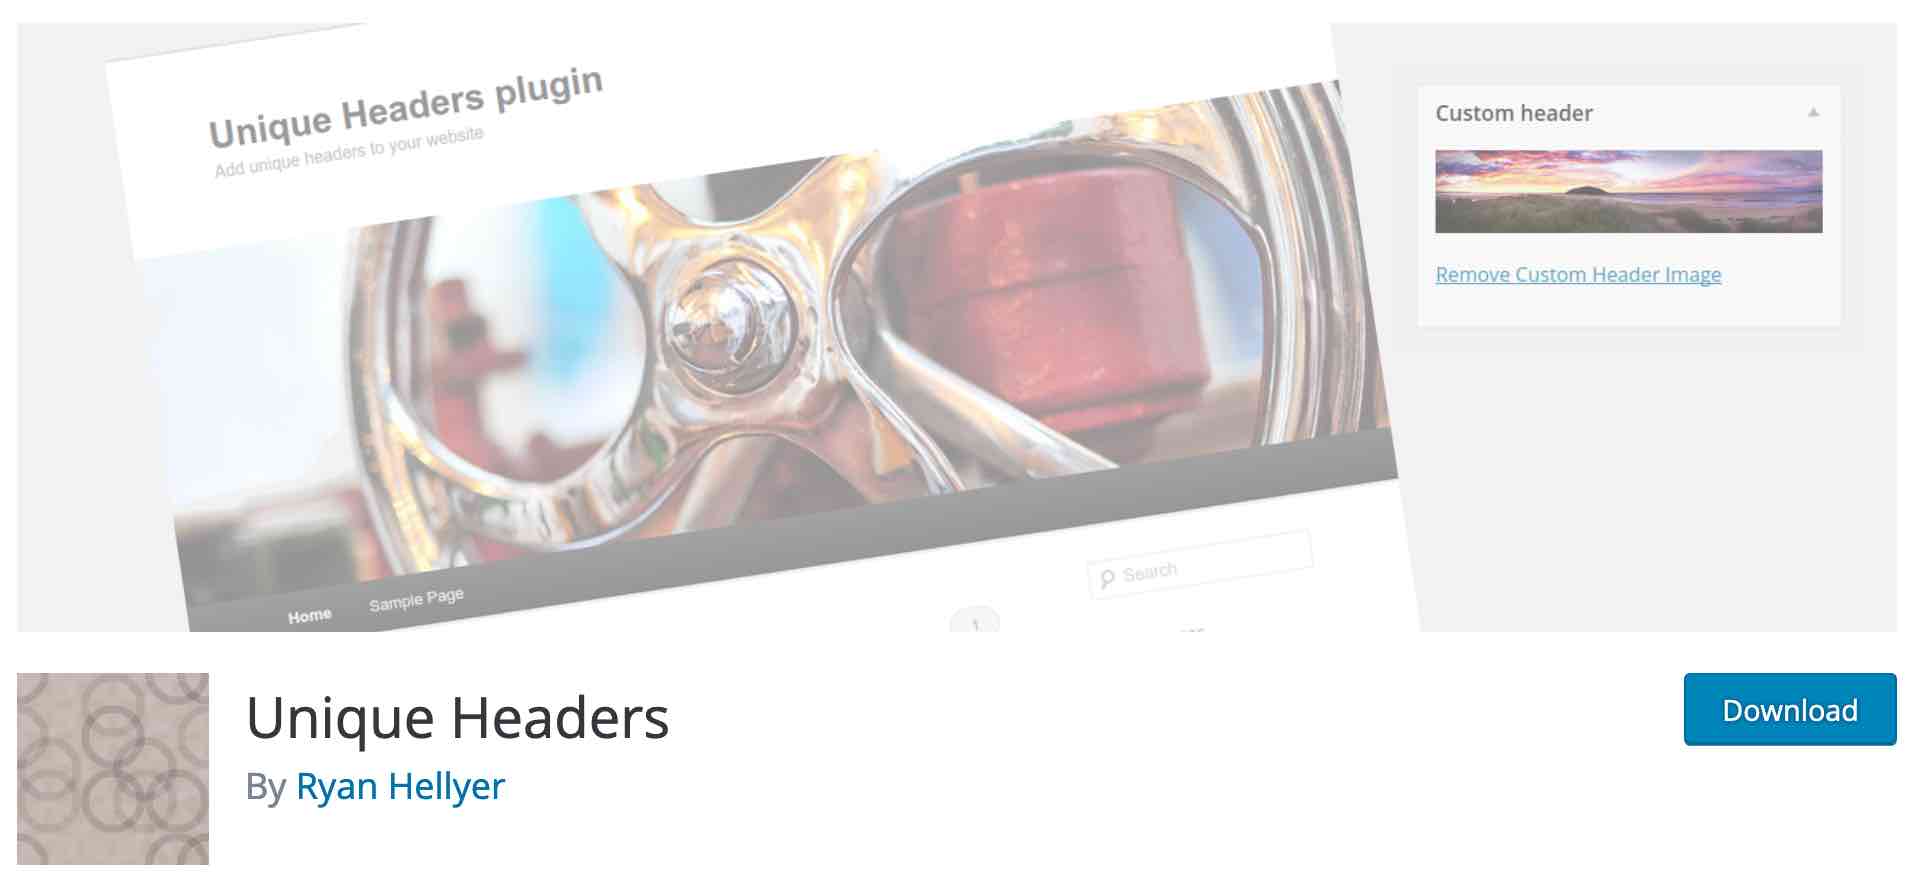 Unique Headers plugin on official wordpress directory